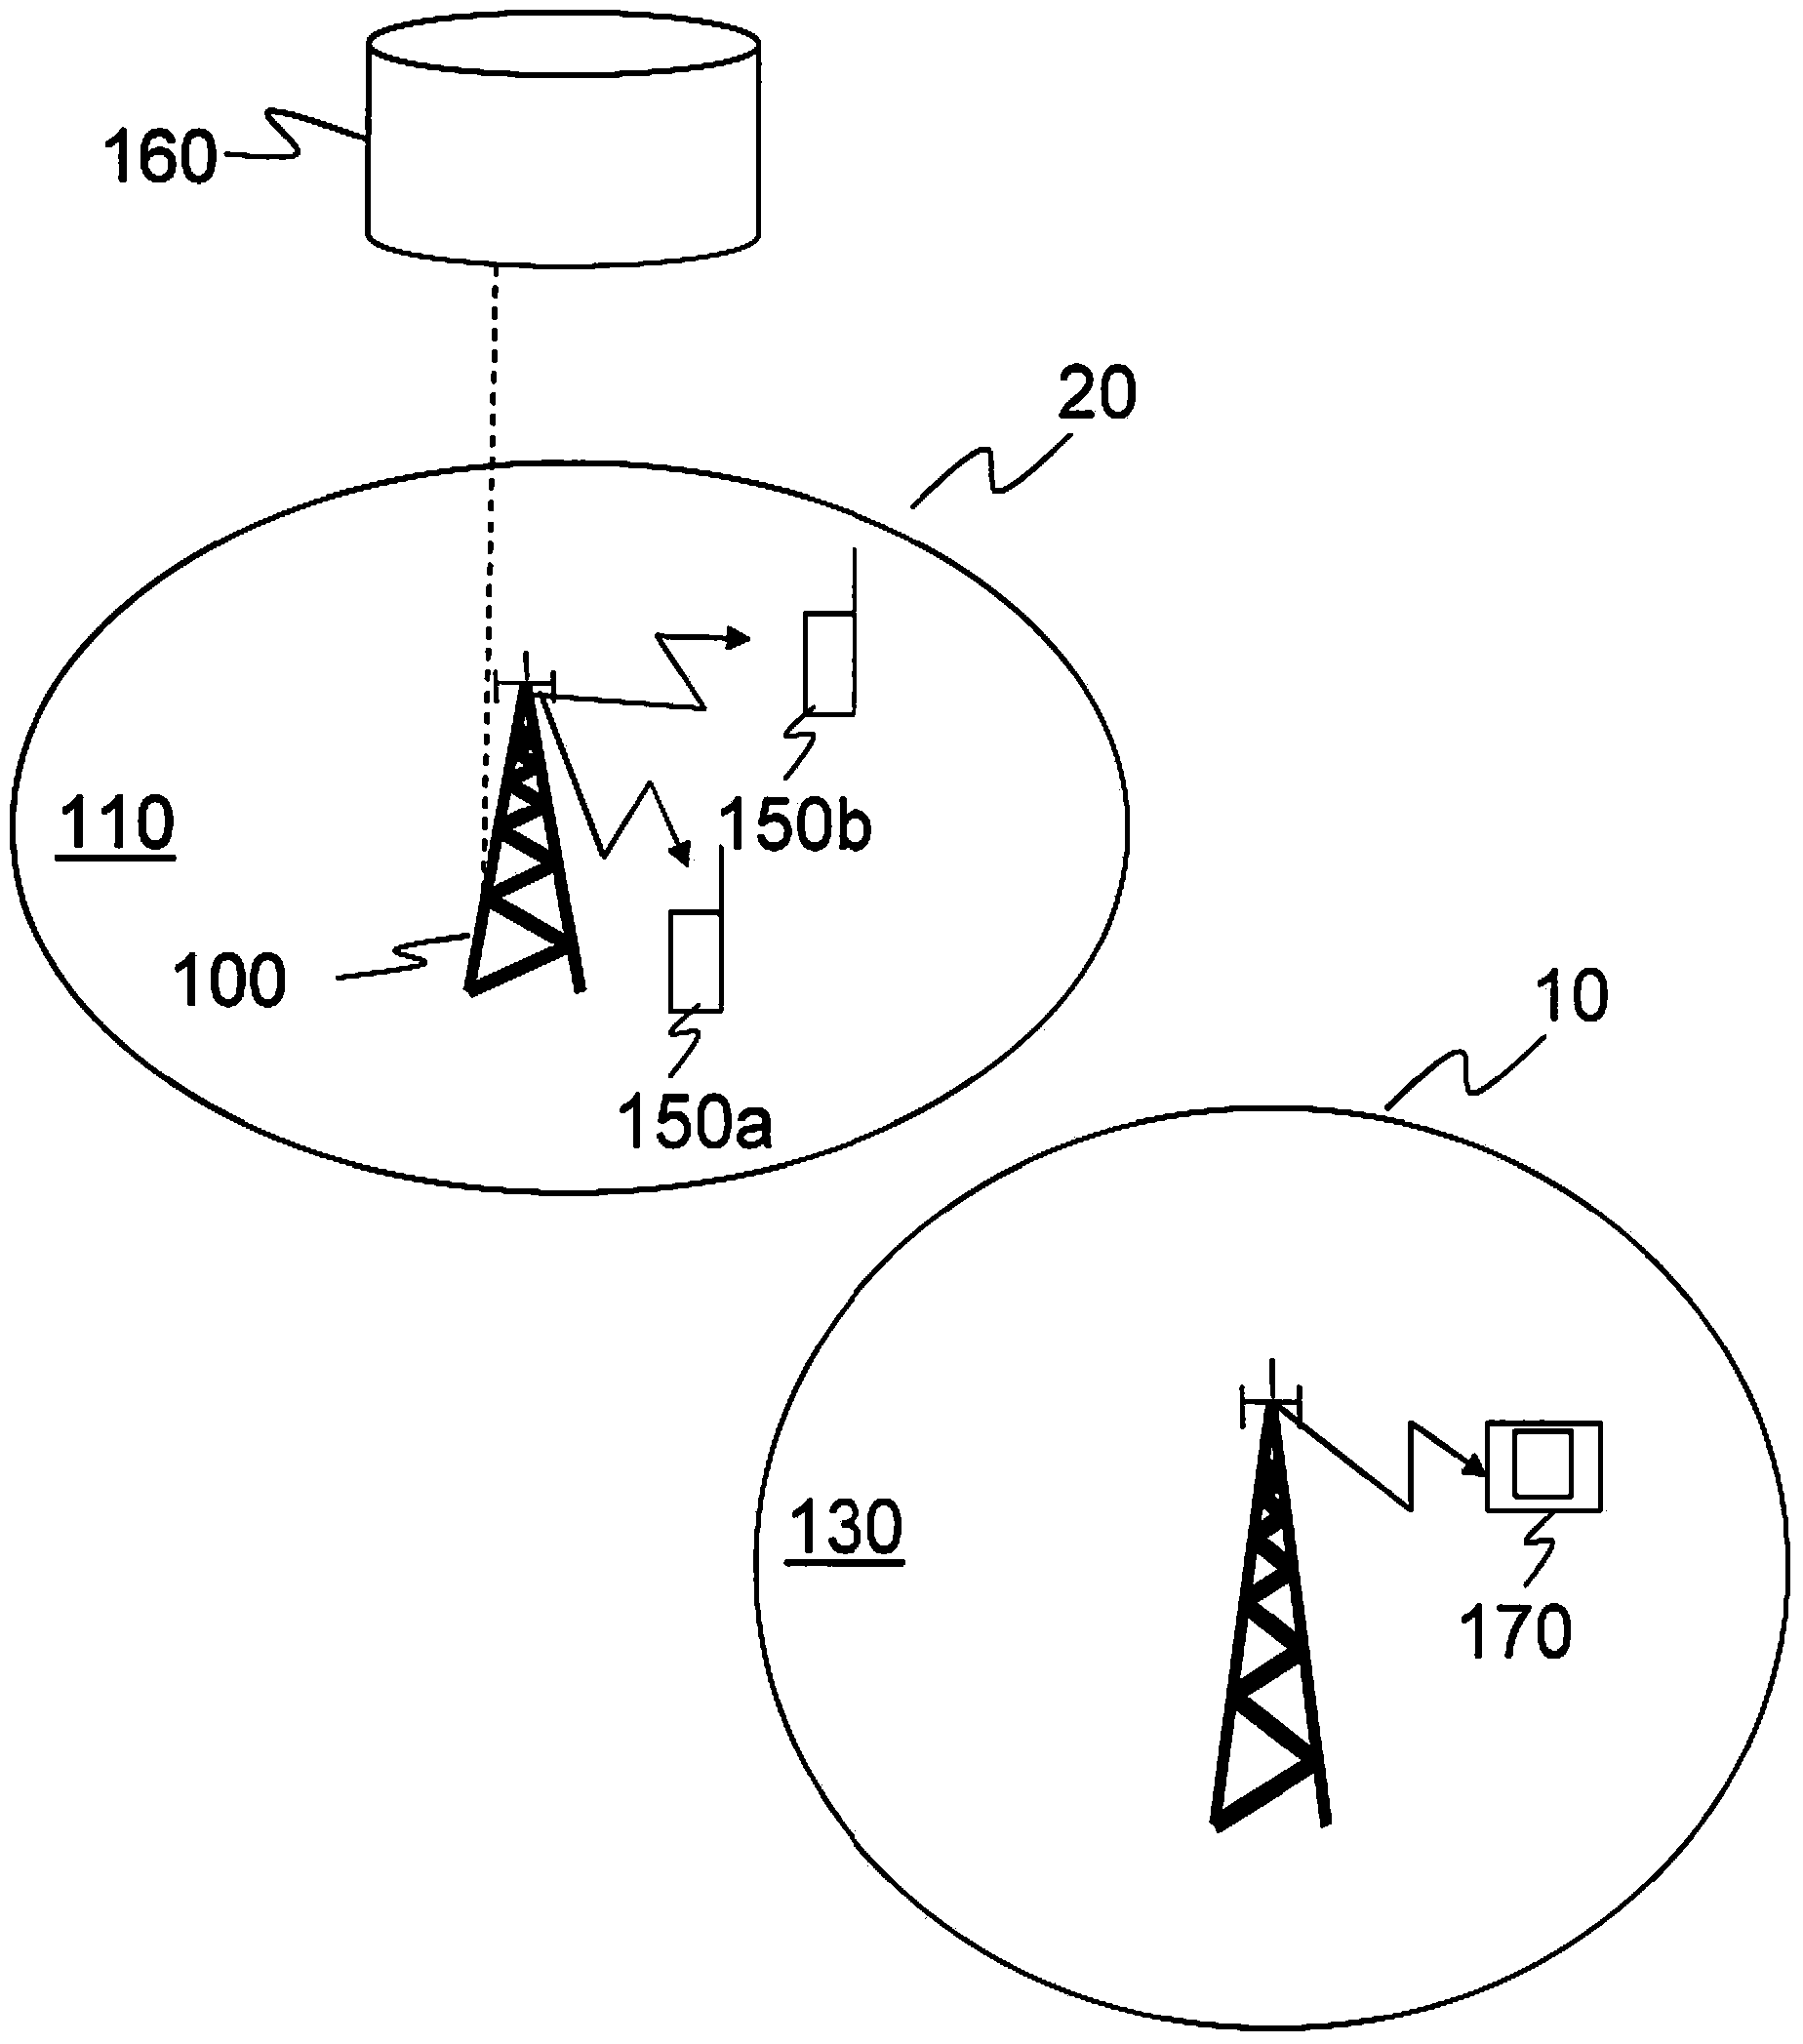 Method for controlling interference from white space units